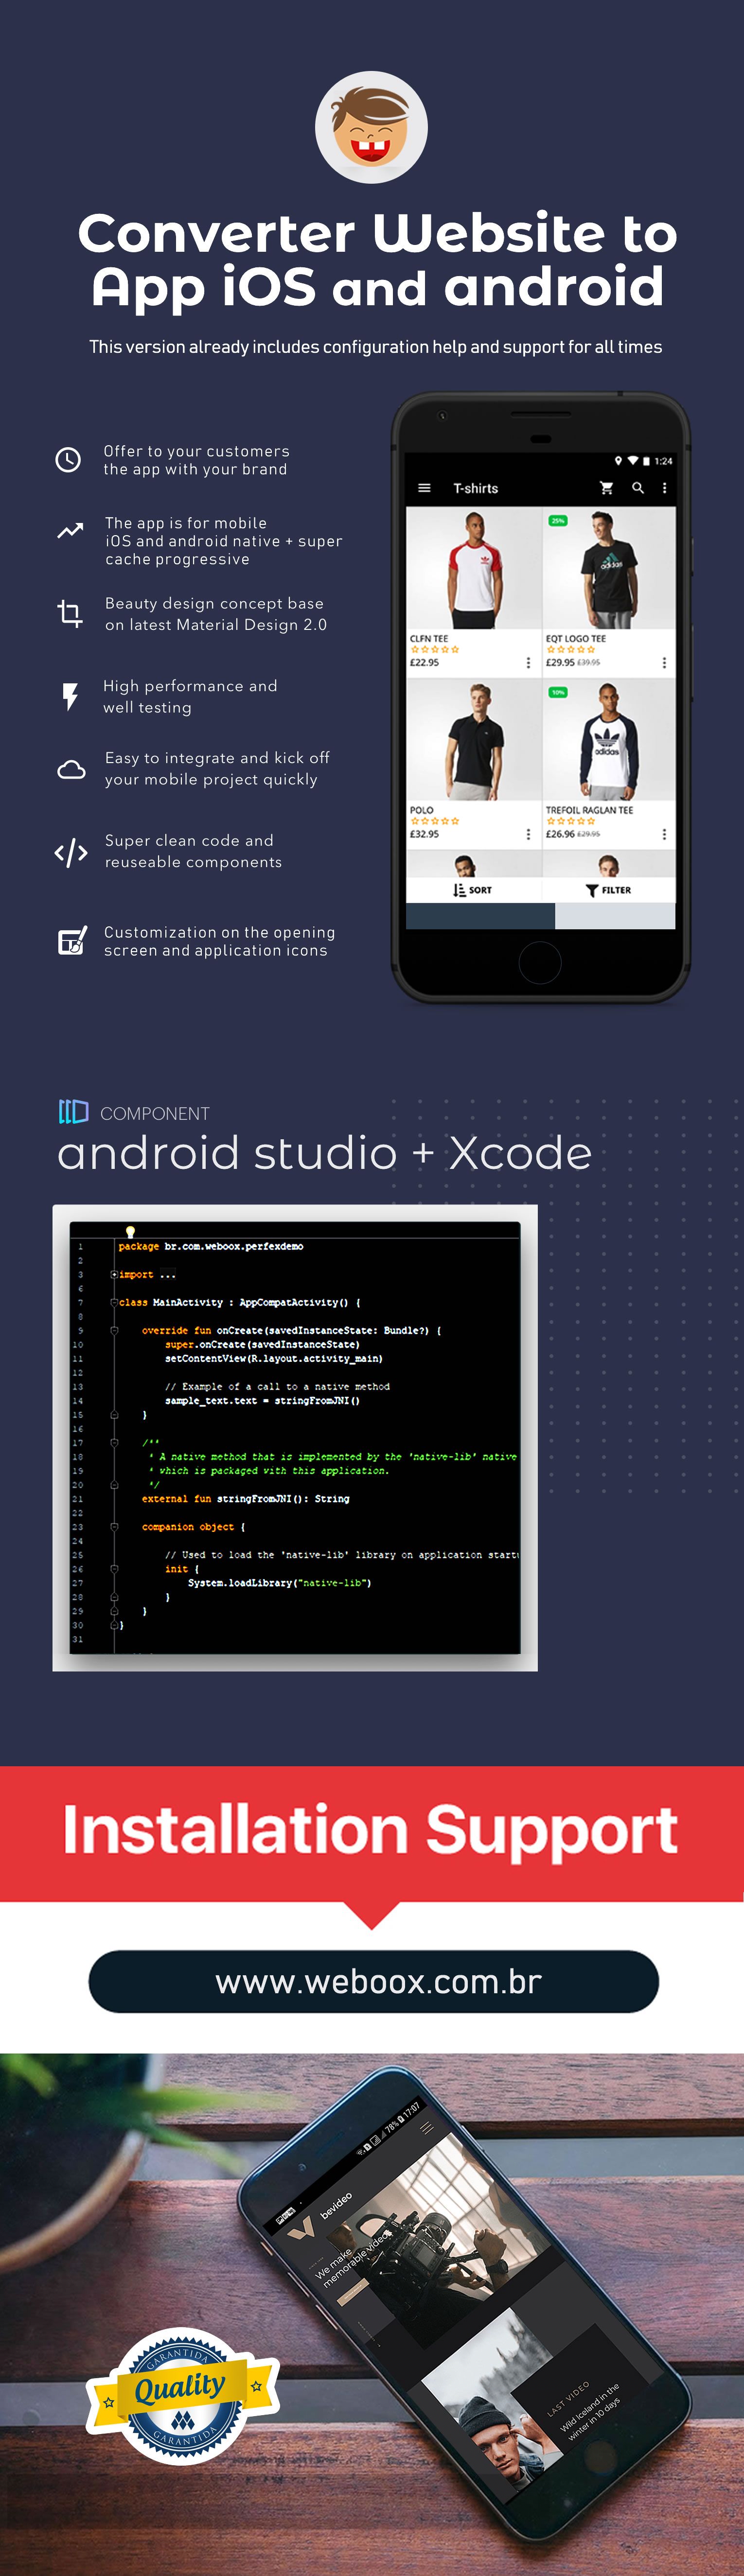 Weboox Convert - Website to iOS and Android App Native PRO - 3